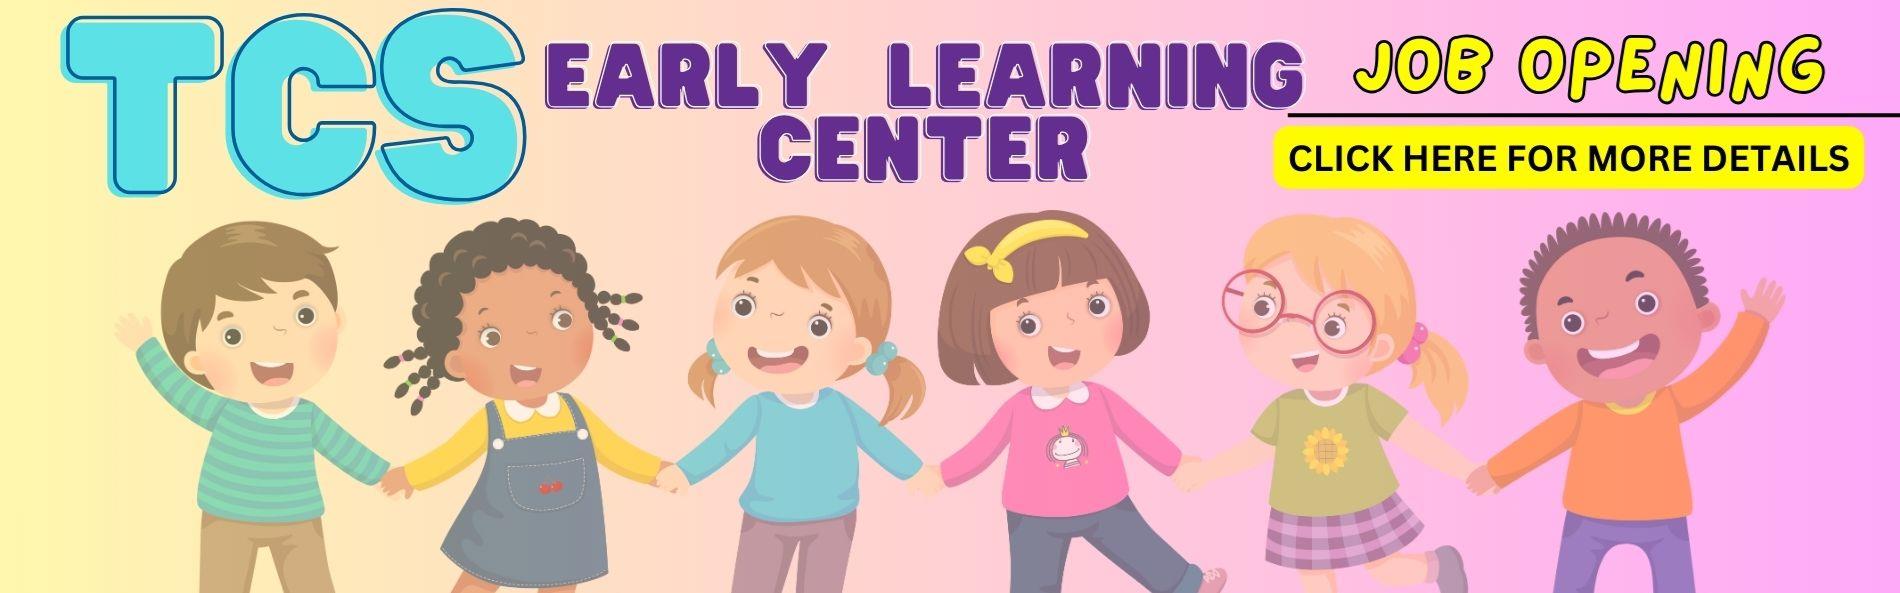 NOW HIRING FOR THE  TCS EARLY CHILDHOOD LEARNING CENTER. CLICK HYPERLINK TO LEANR MORE.